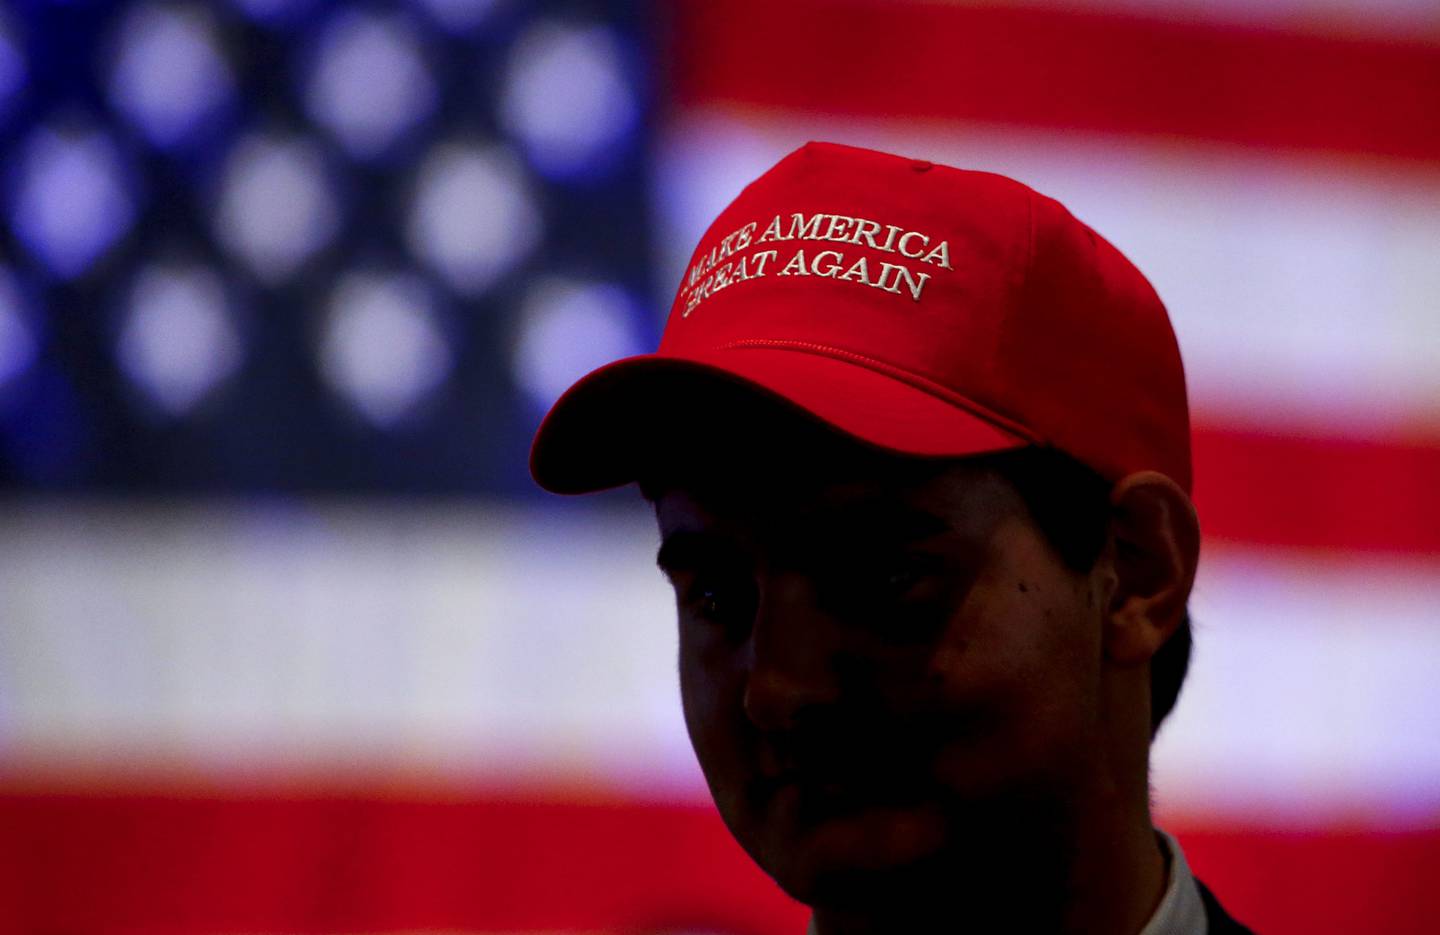 Oliver Lester, of Montgomery, wears a hat with President President Donald Trump's campaign slogan as he watches results come in for Gov. Kay Ivey at a watch party, Tuesday, Nov. 6, 2018, in Montgomery, Ala. (AP Photo/Butch Dill)